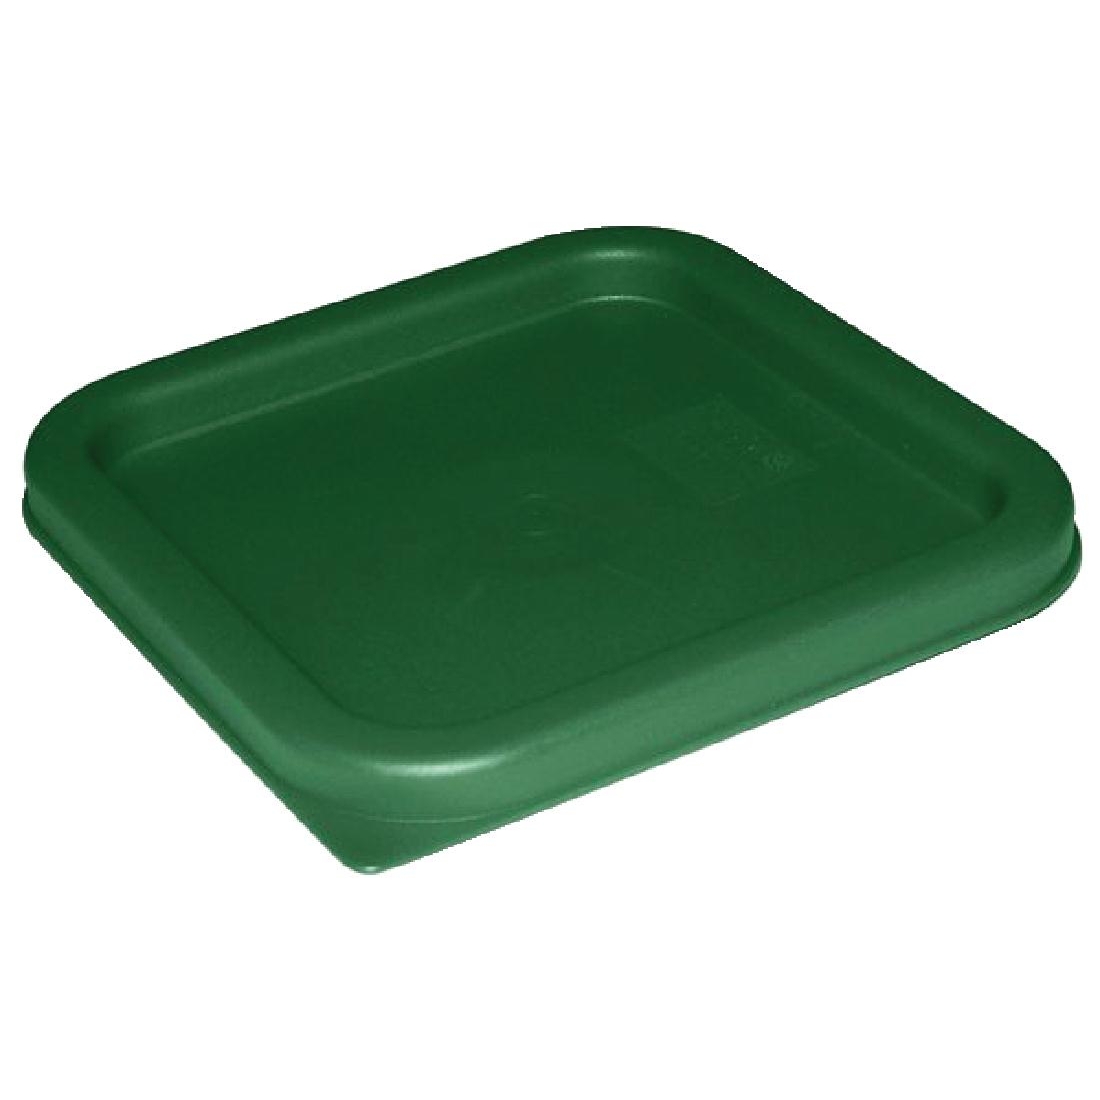 Vogue Square Lid Green Small